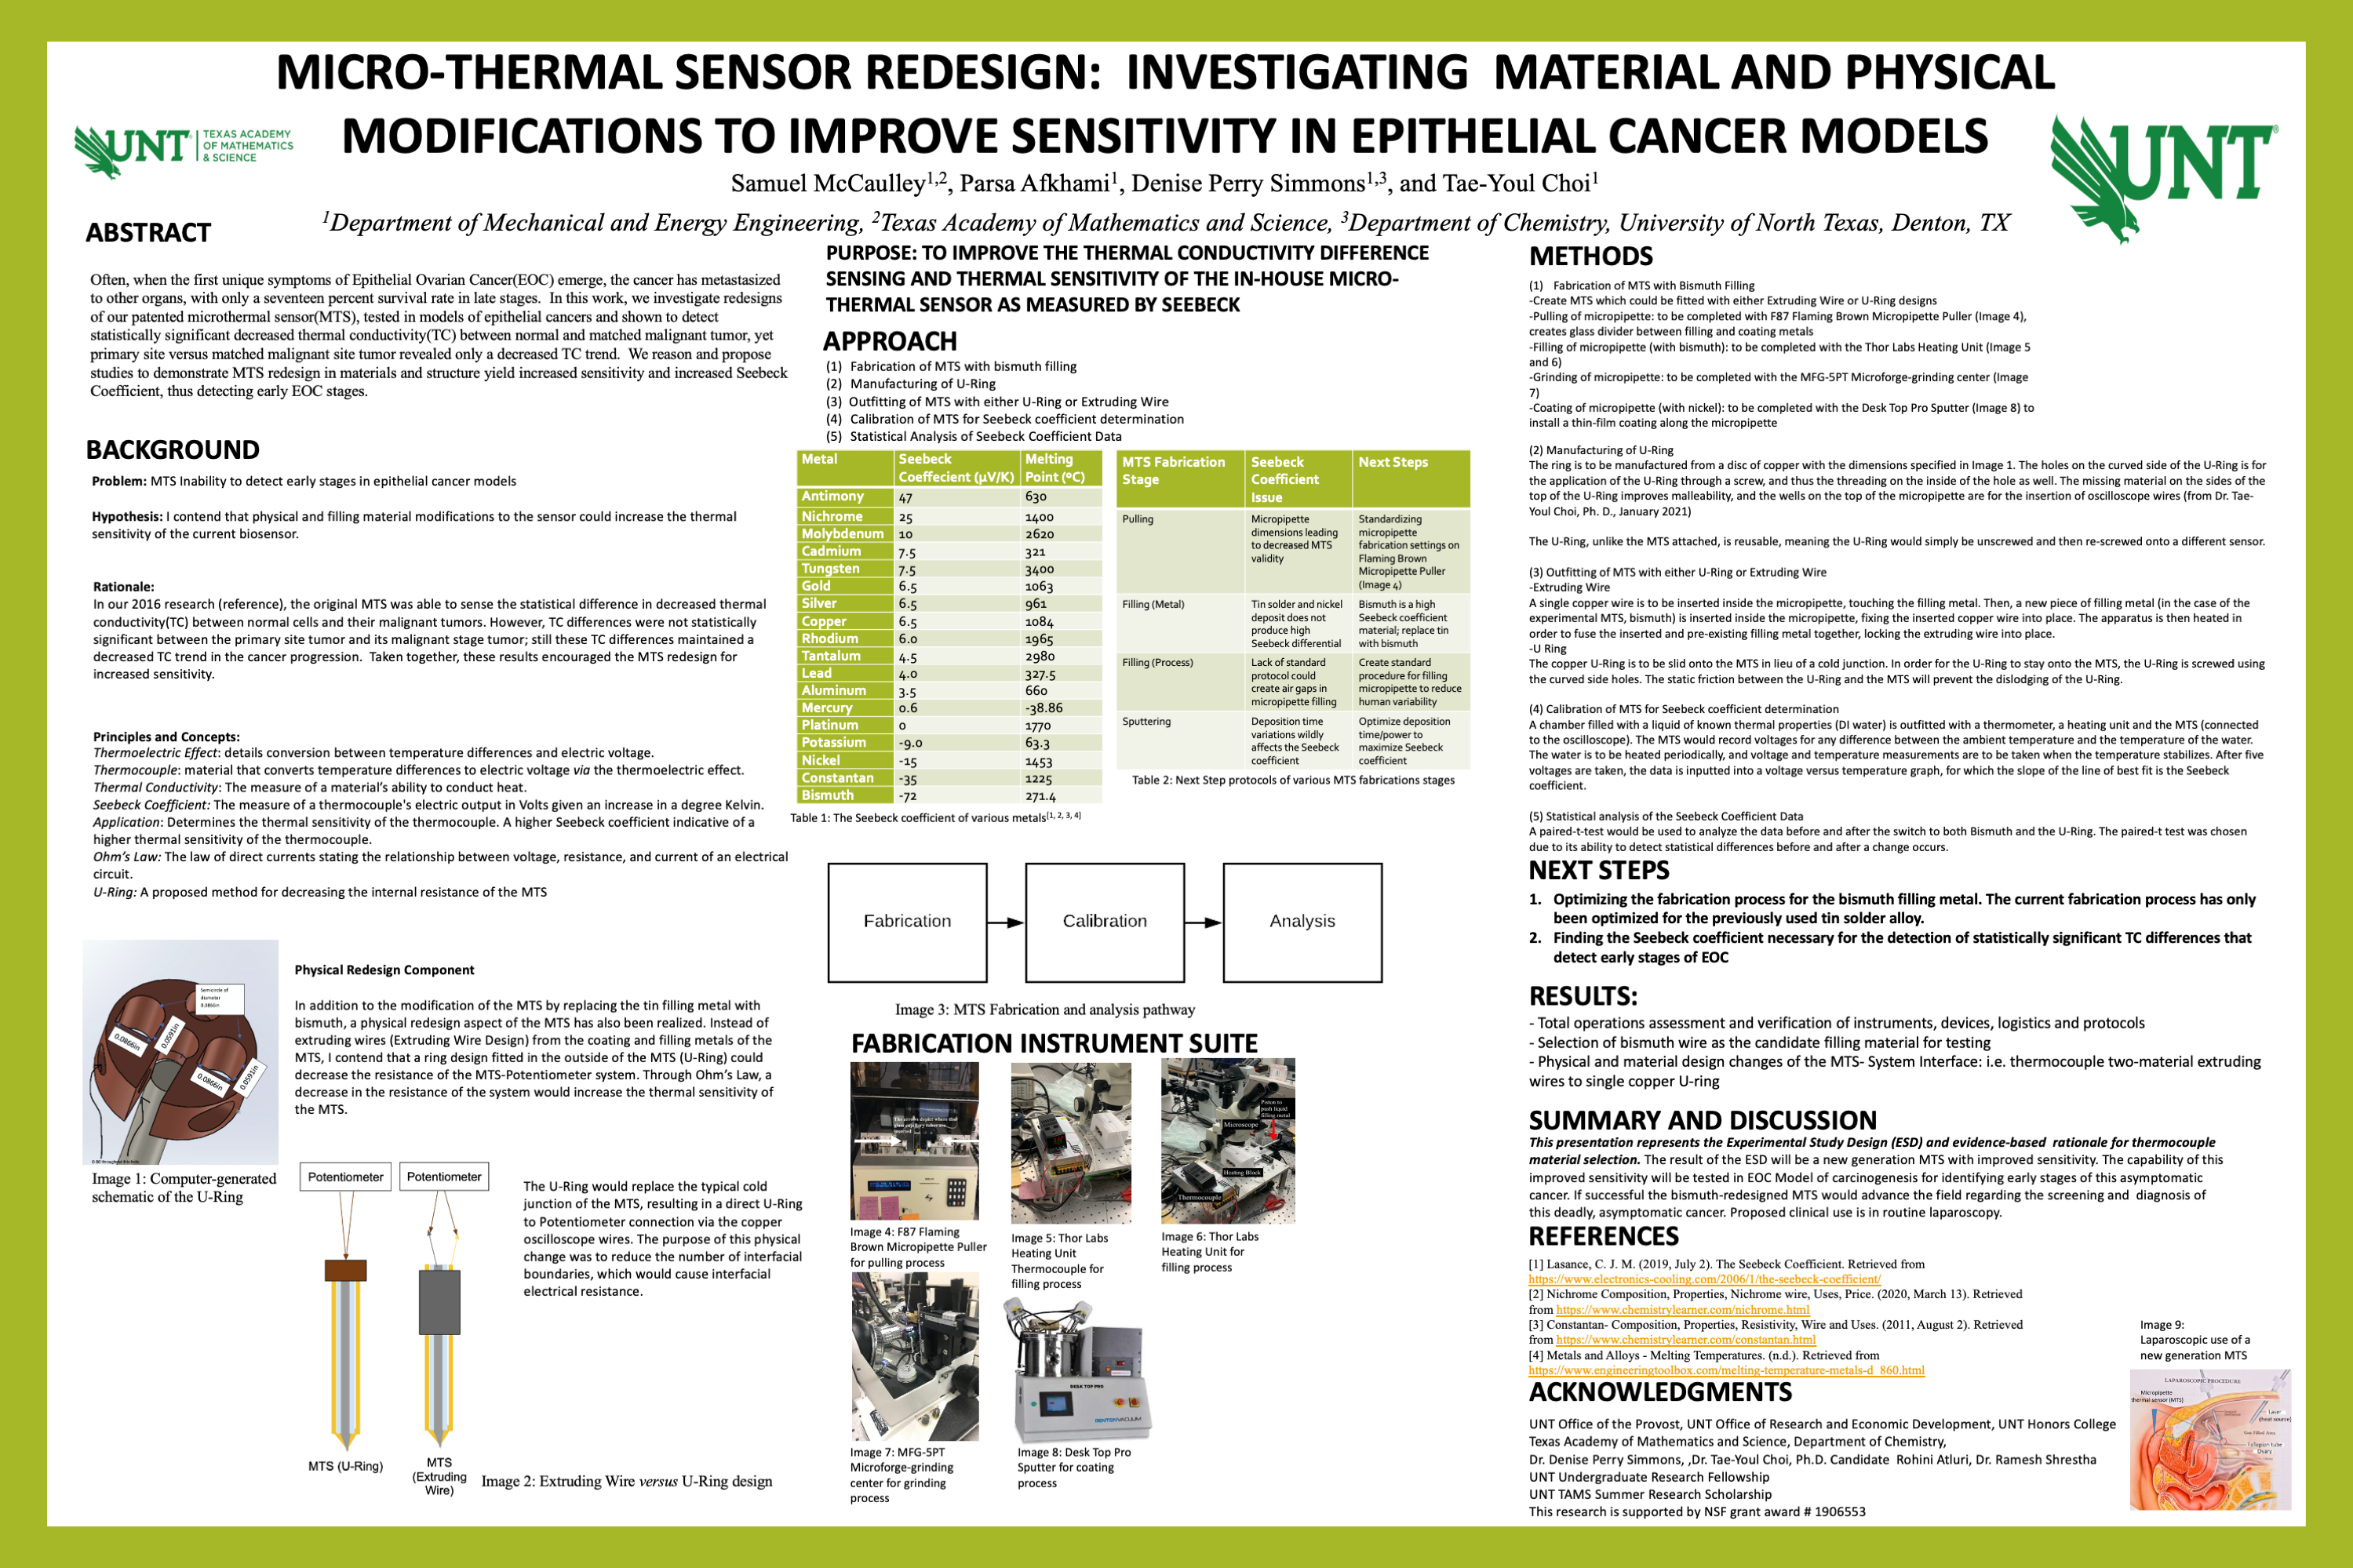 Micro-thermal Sensor Redesign: Investigating Material and Physical Modifications to Improve Sensitiv